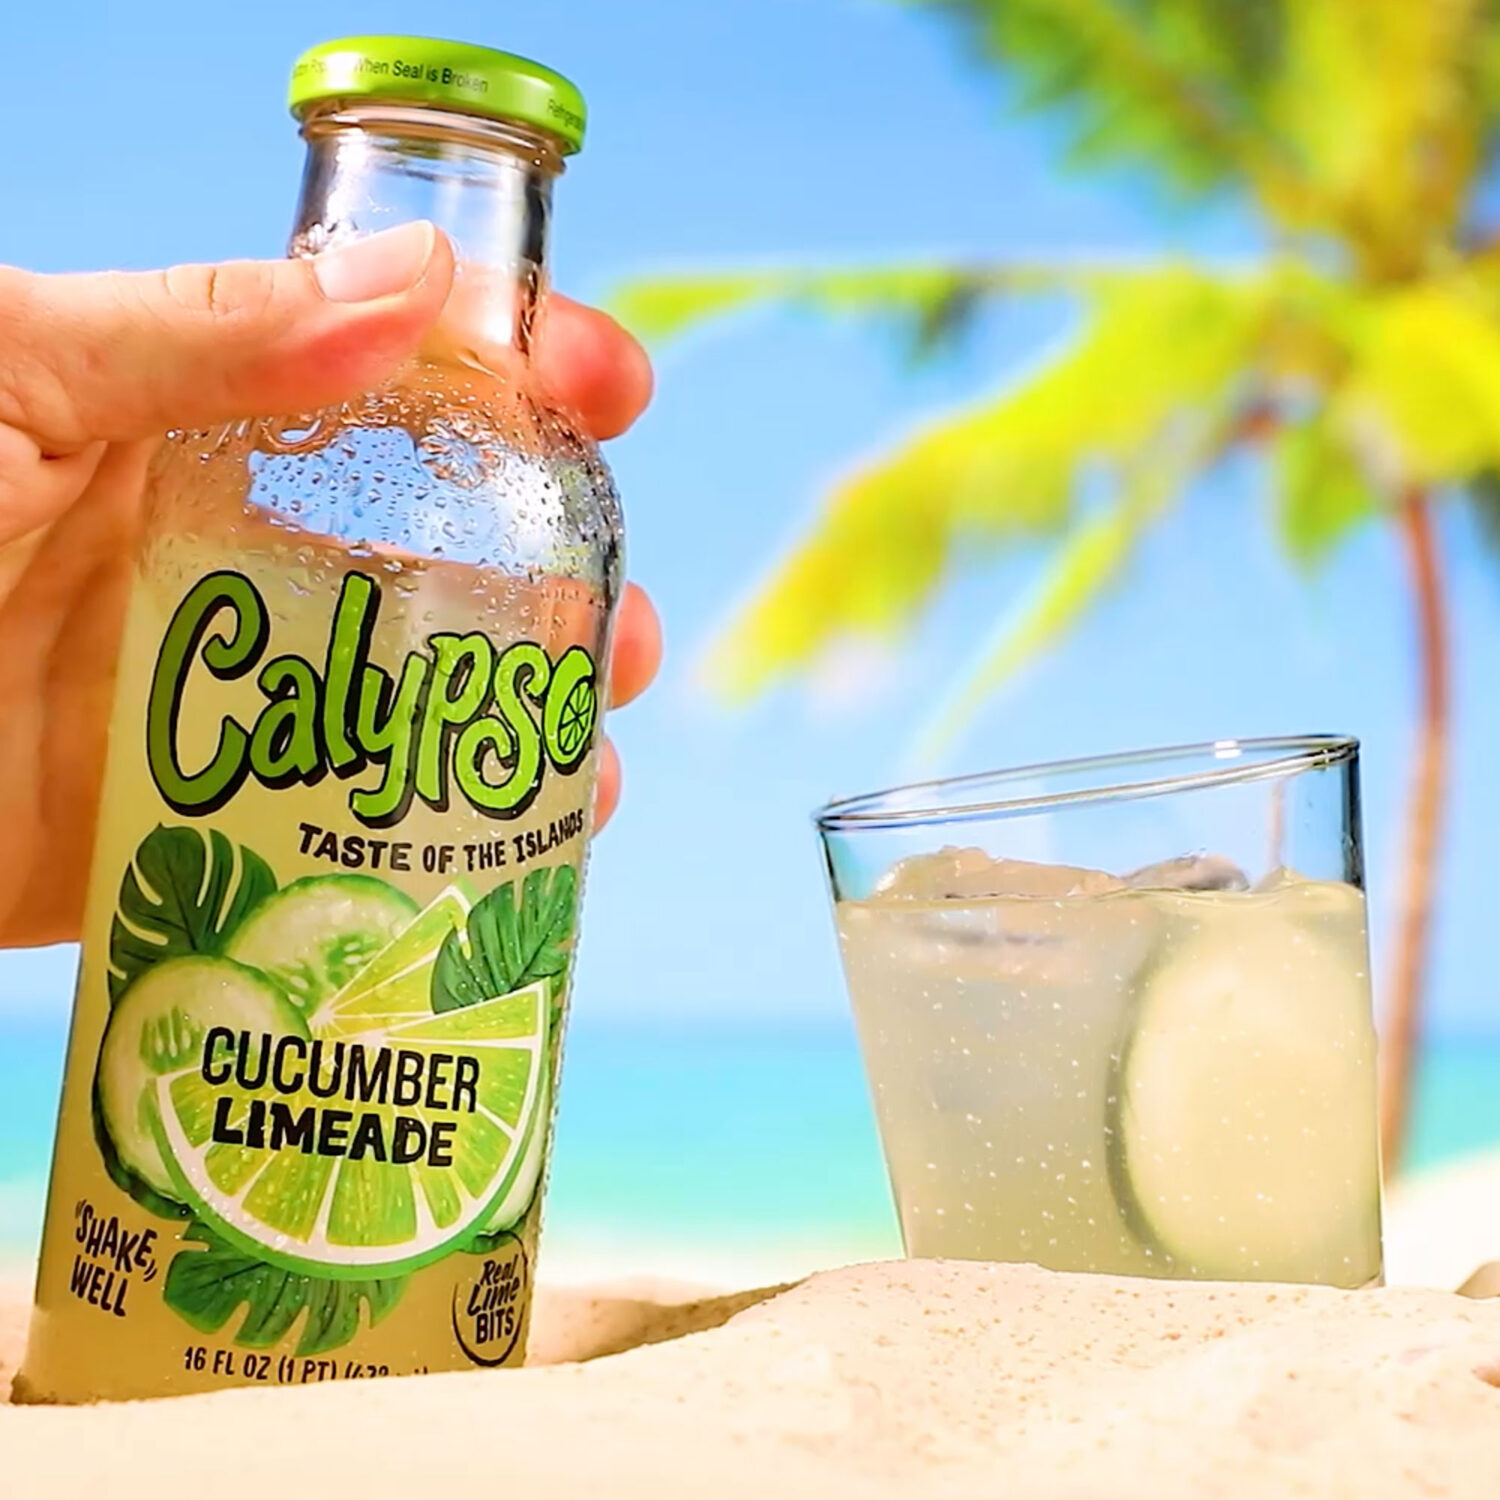 Calypso Cucumber Limeade bottle next to to a cocktail on the beach.